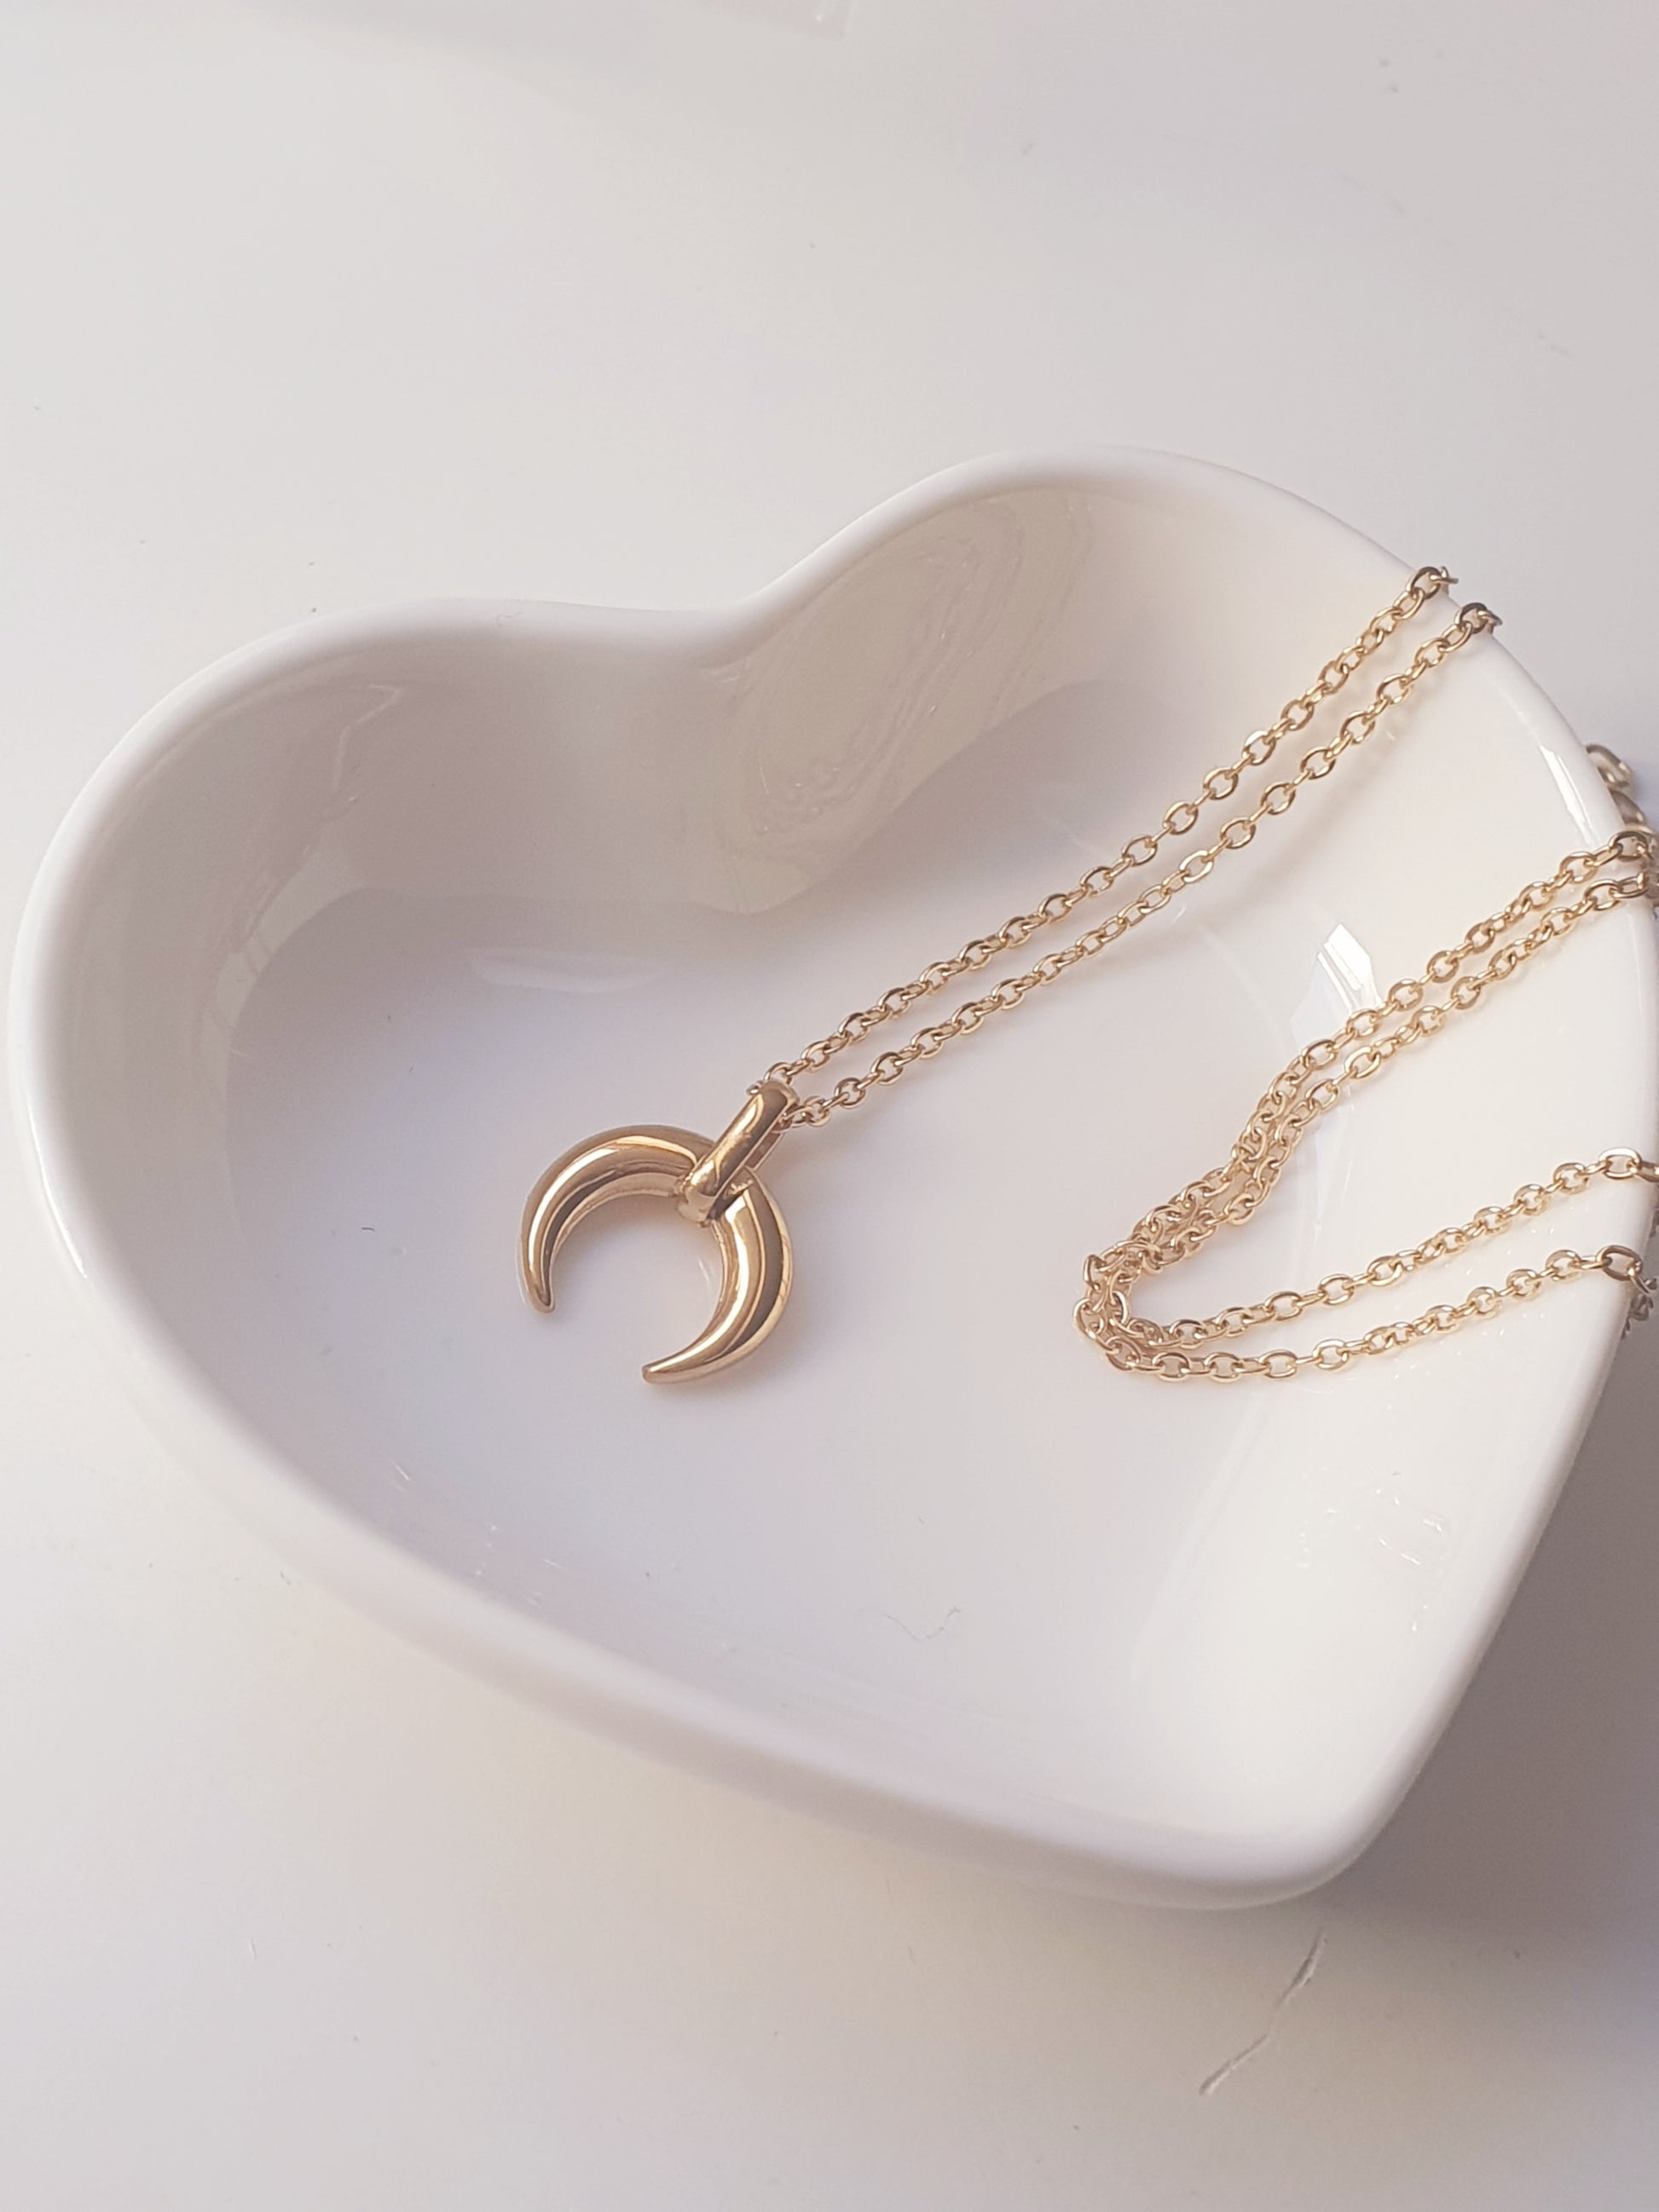  necklace with a crescent moon pendant rests on a white heart shaped dish